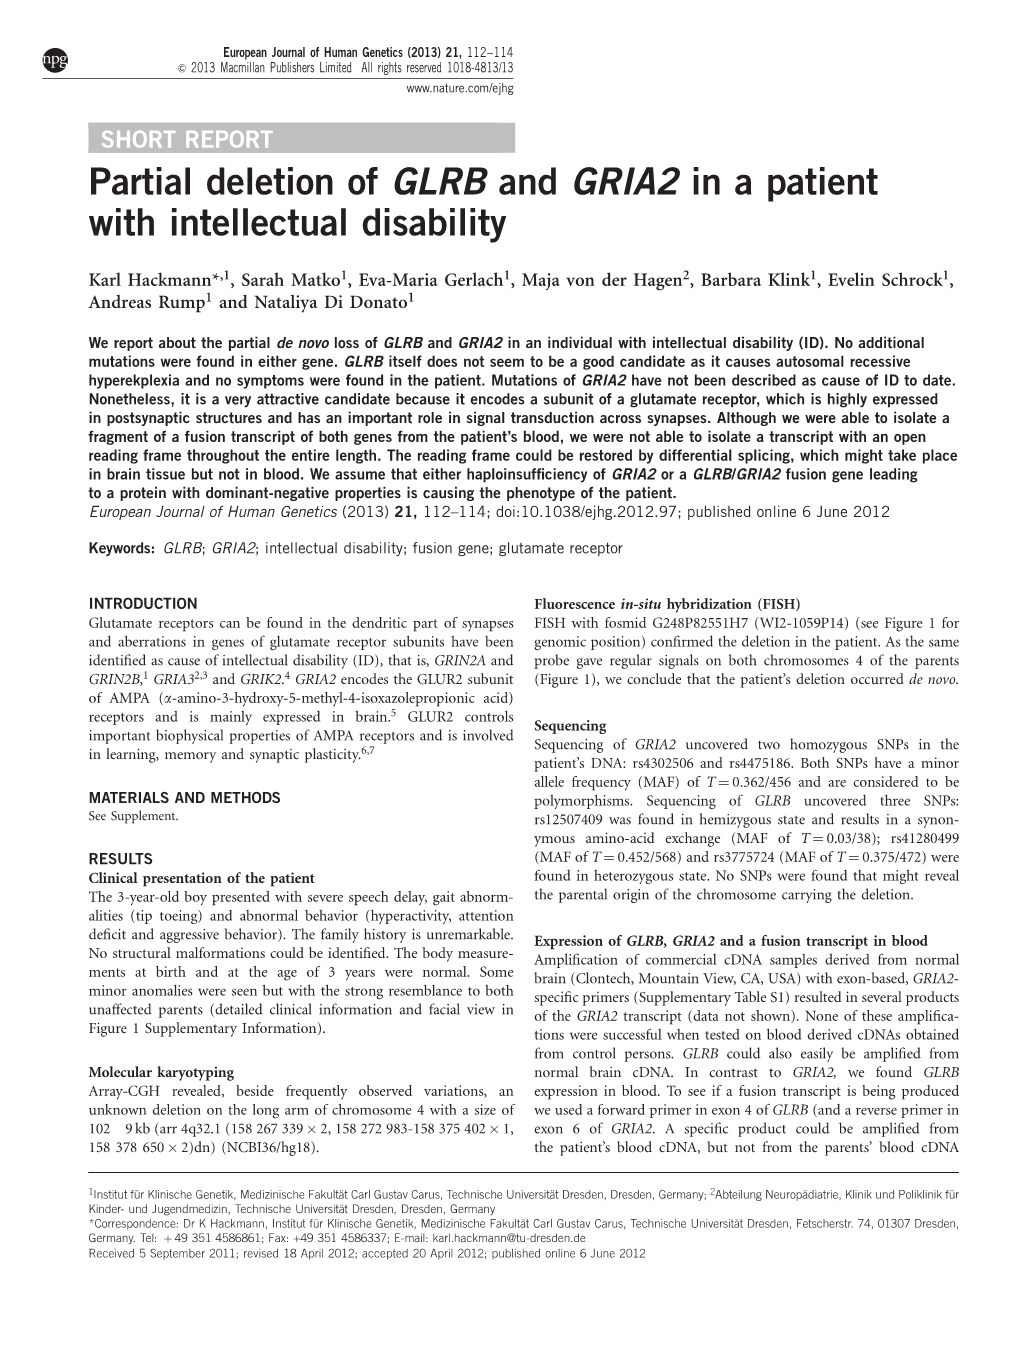 Partial Deletion of GLRB and GRIA2 in a Patient with Intellectual Disability